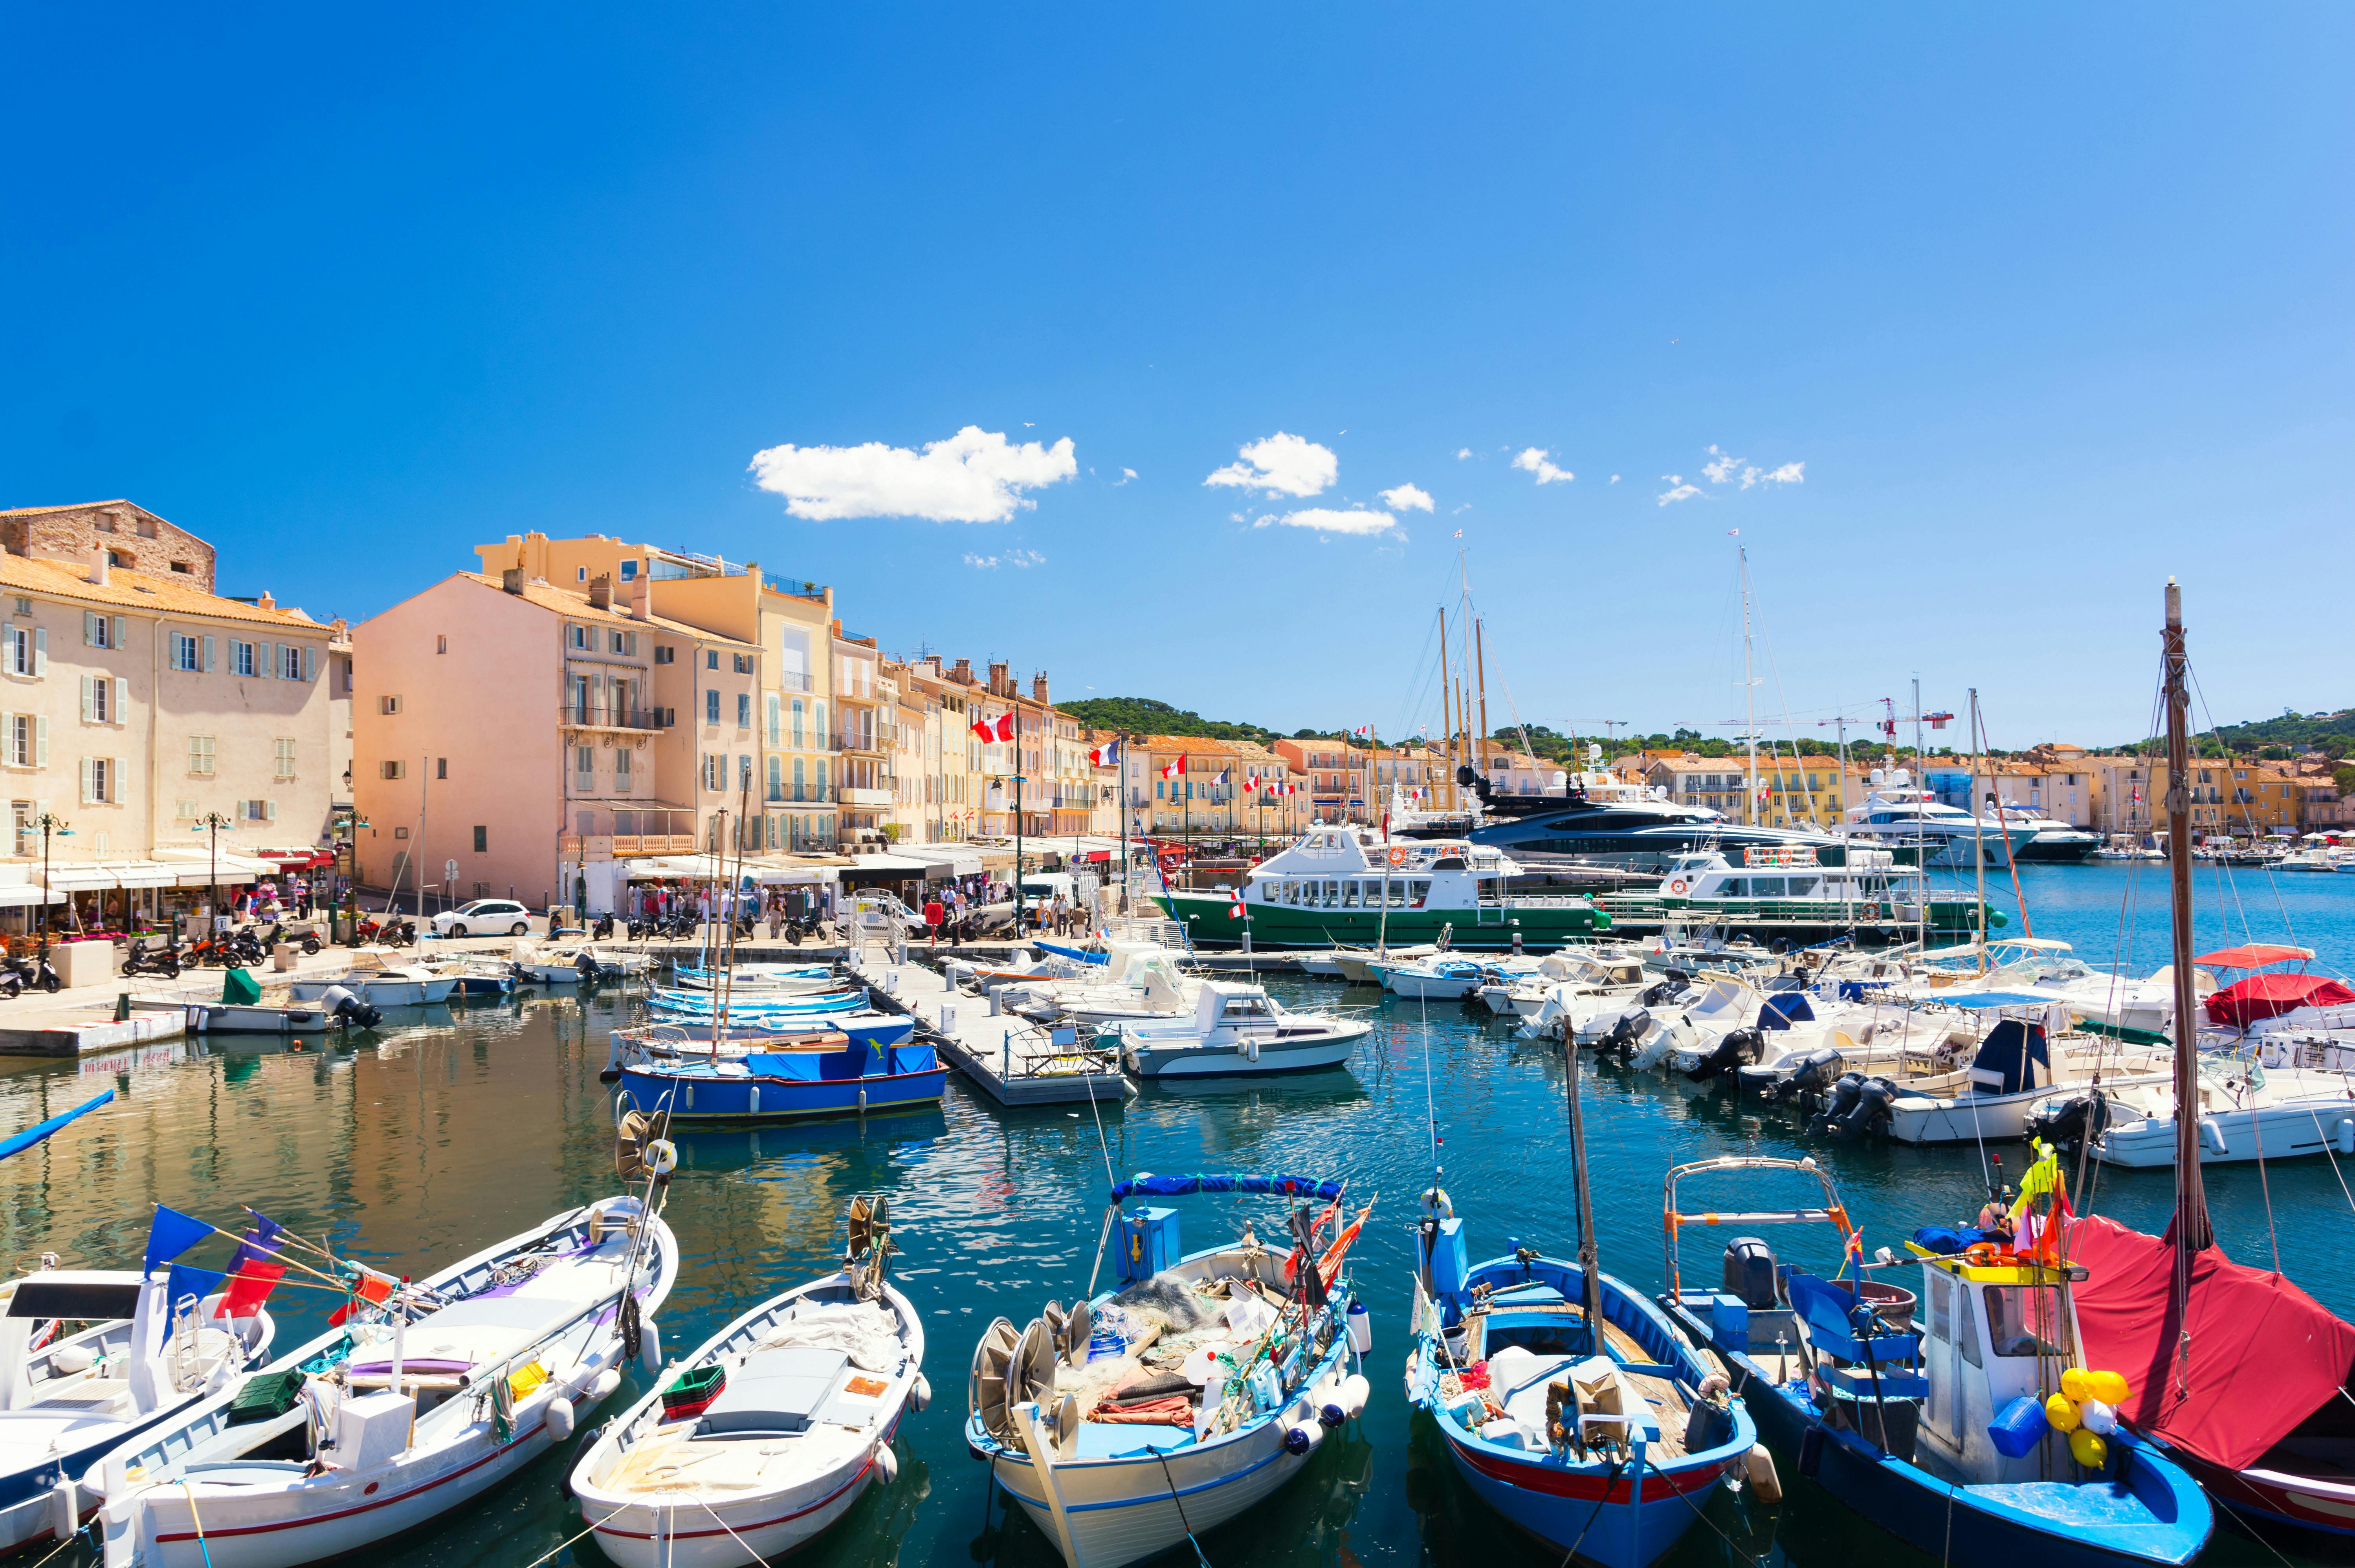 Private trip from St Tropez port to surrounding towns